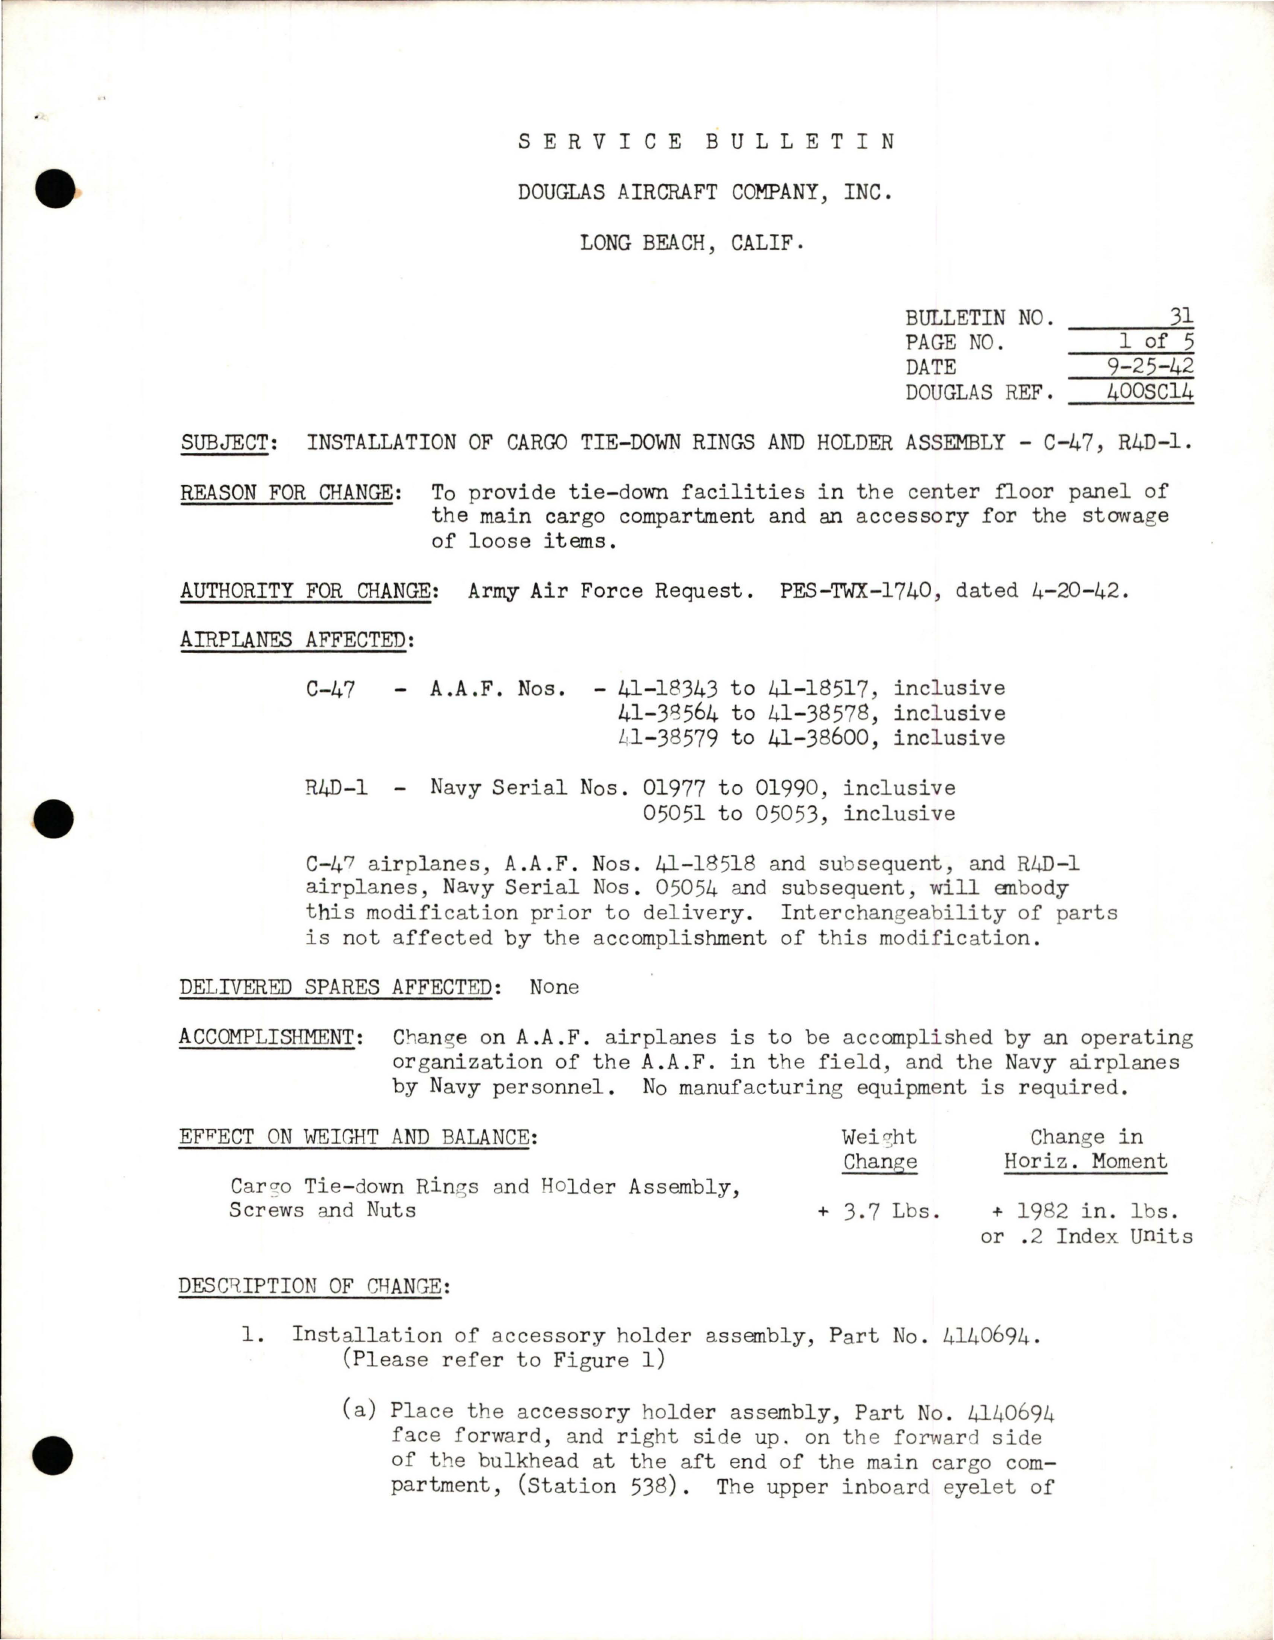 Sample page 1 from AirCorps Library document: Installation of Cargo Tie-Down Rings & Holder Assembly